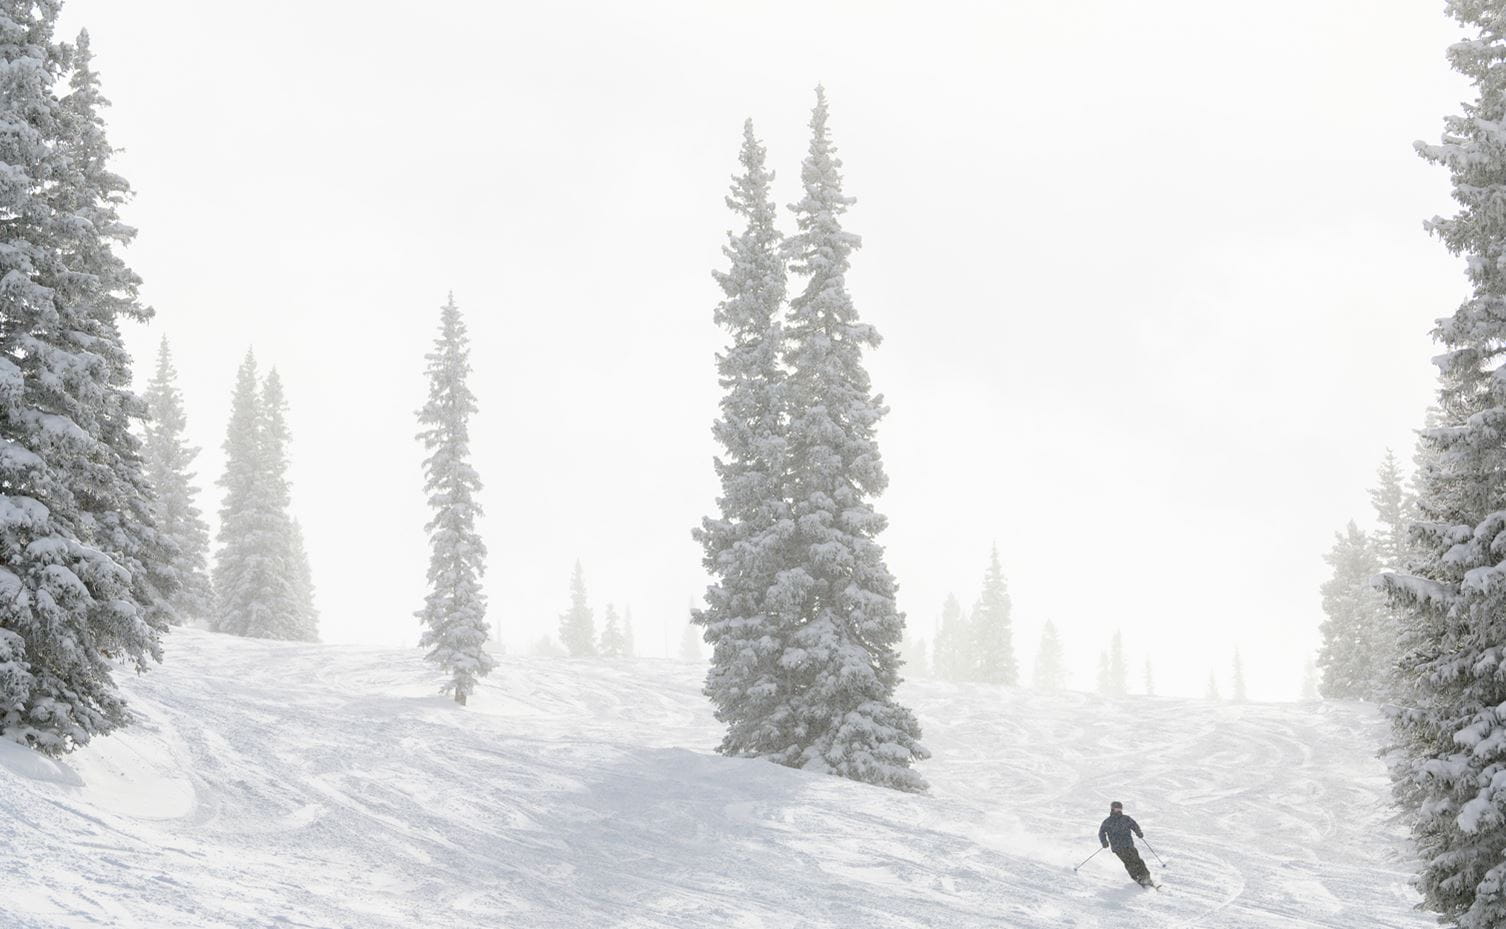 A lone skier enjoys skiing through spaced out trees at Snowmass